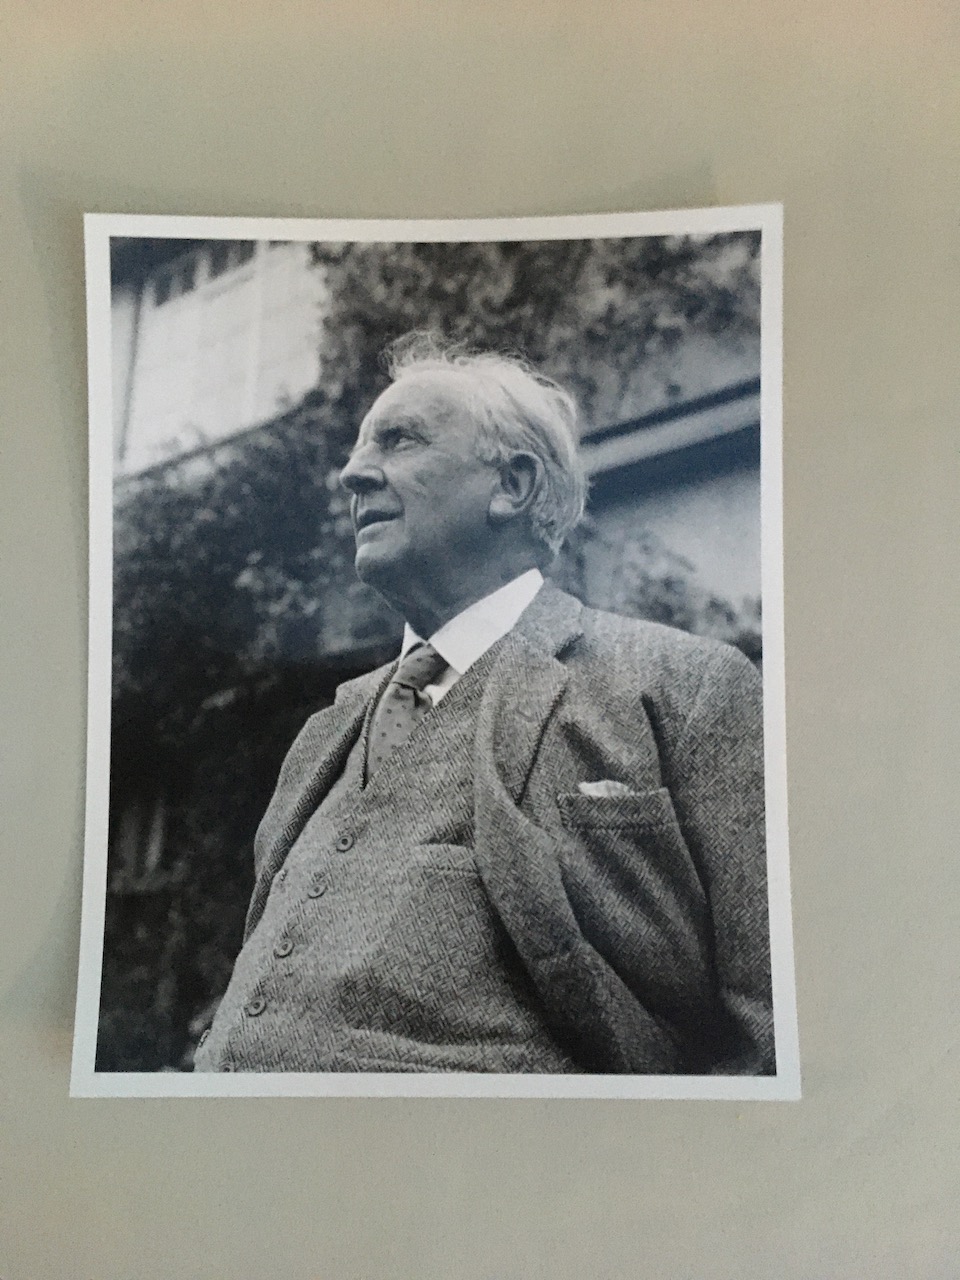 Exclusive Photographic Print: J. R. R. Tolkien gazing into the horizon outdoors